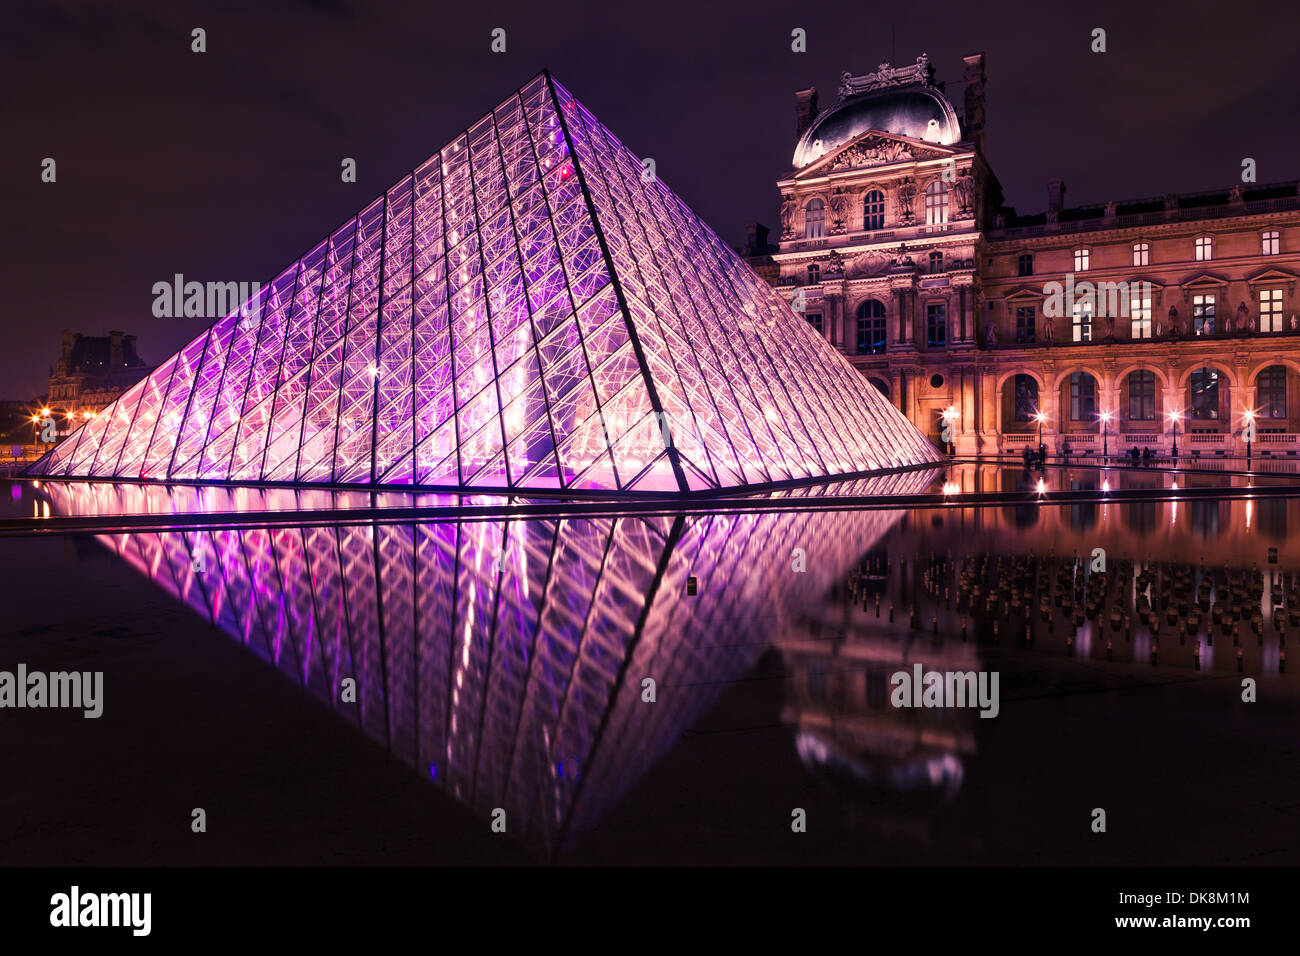 Night scene of the Pyramid entrance of Louvre Museum, Paris. Reflection in the pond Stock Photo